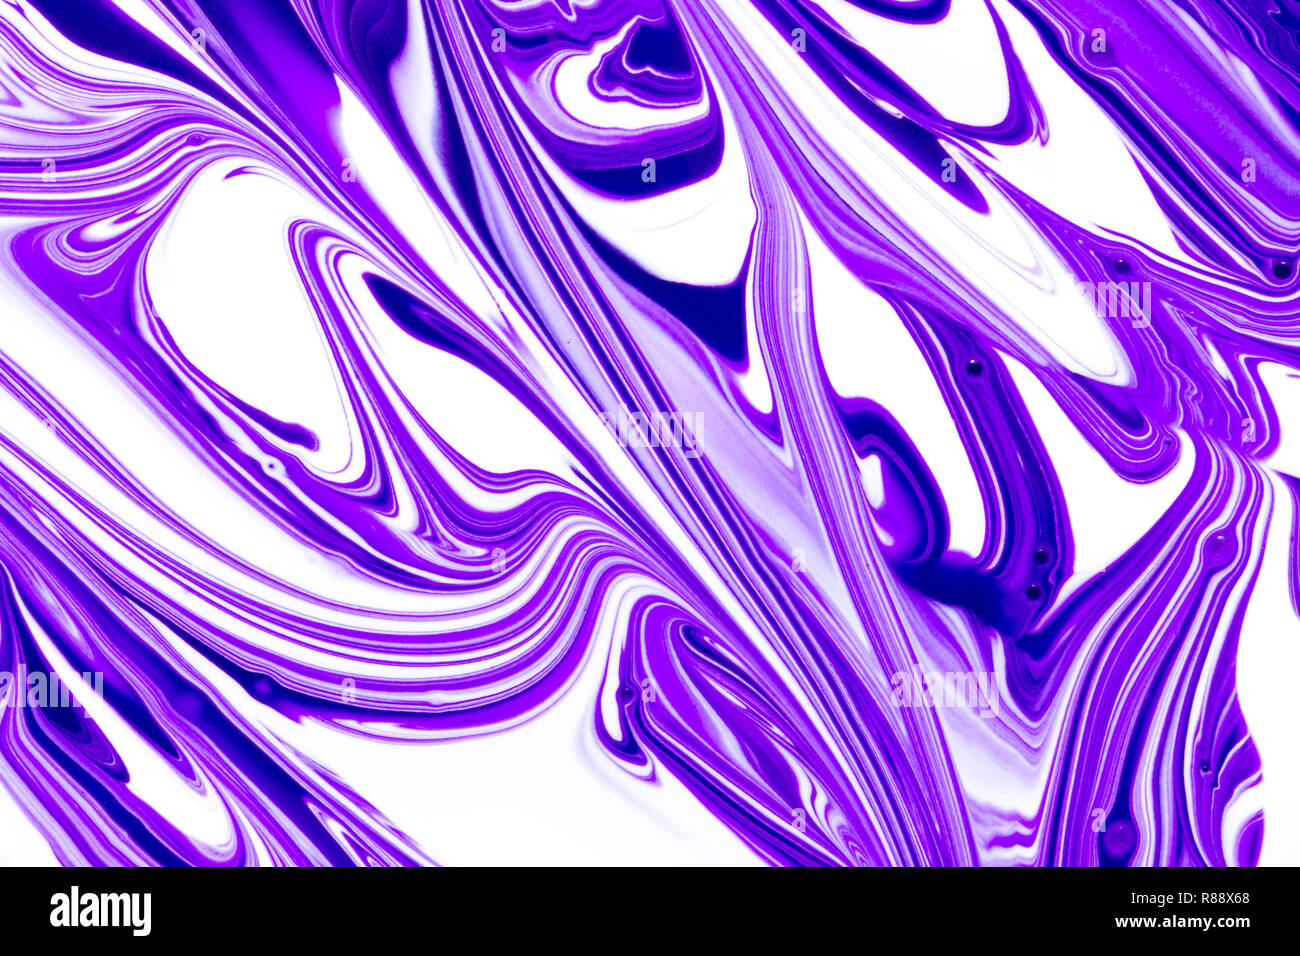 violet and white abstract